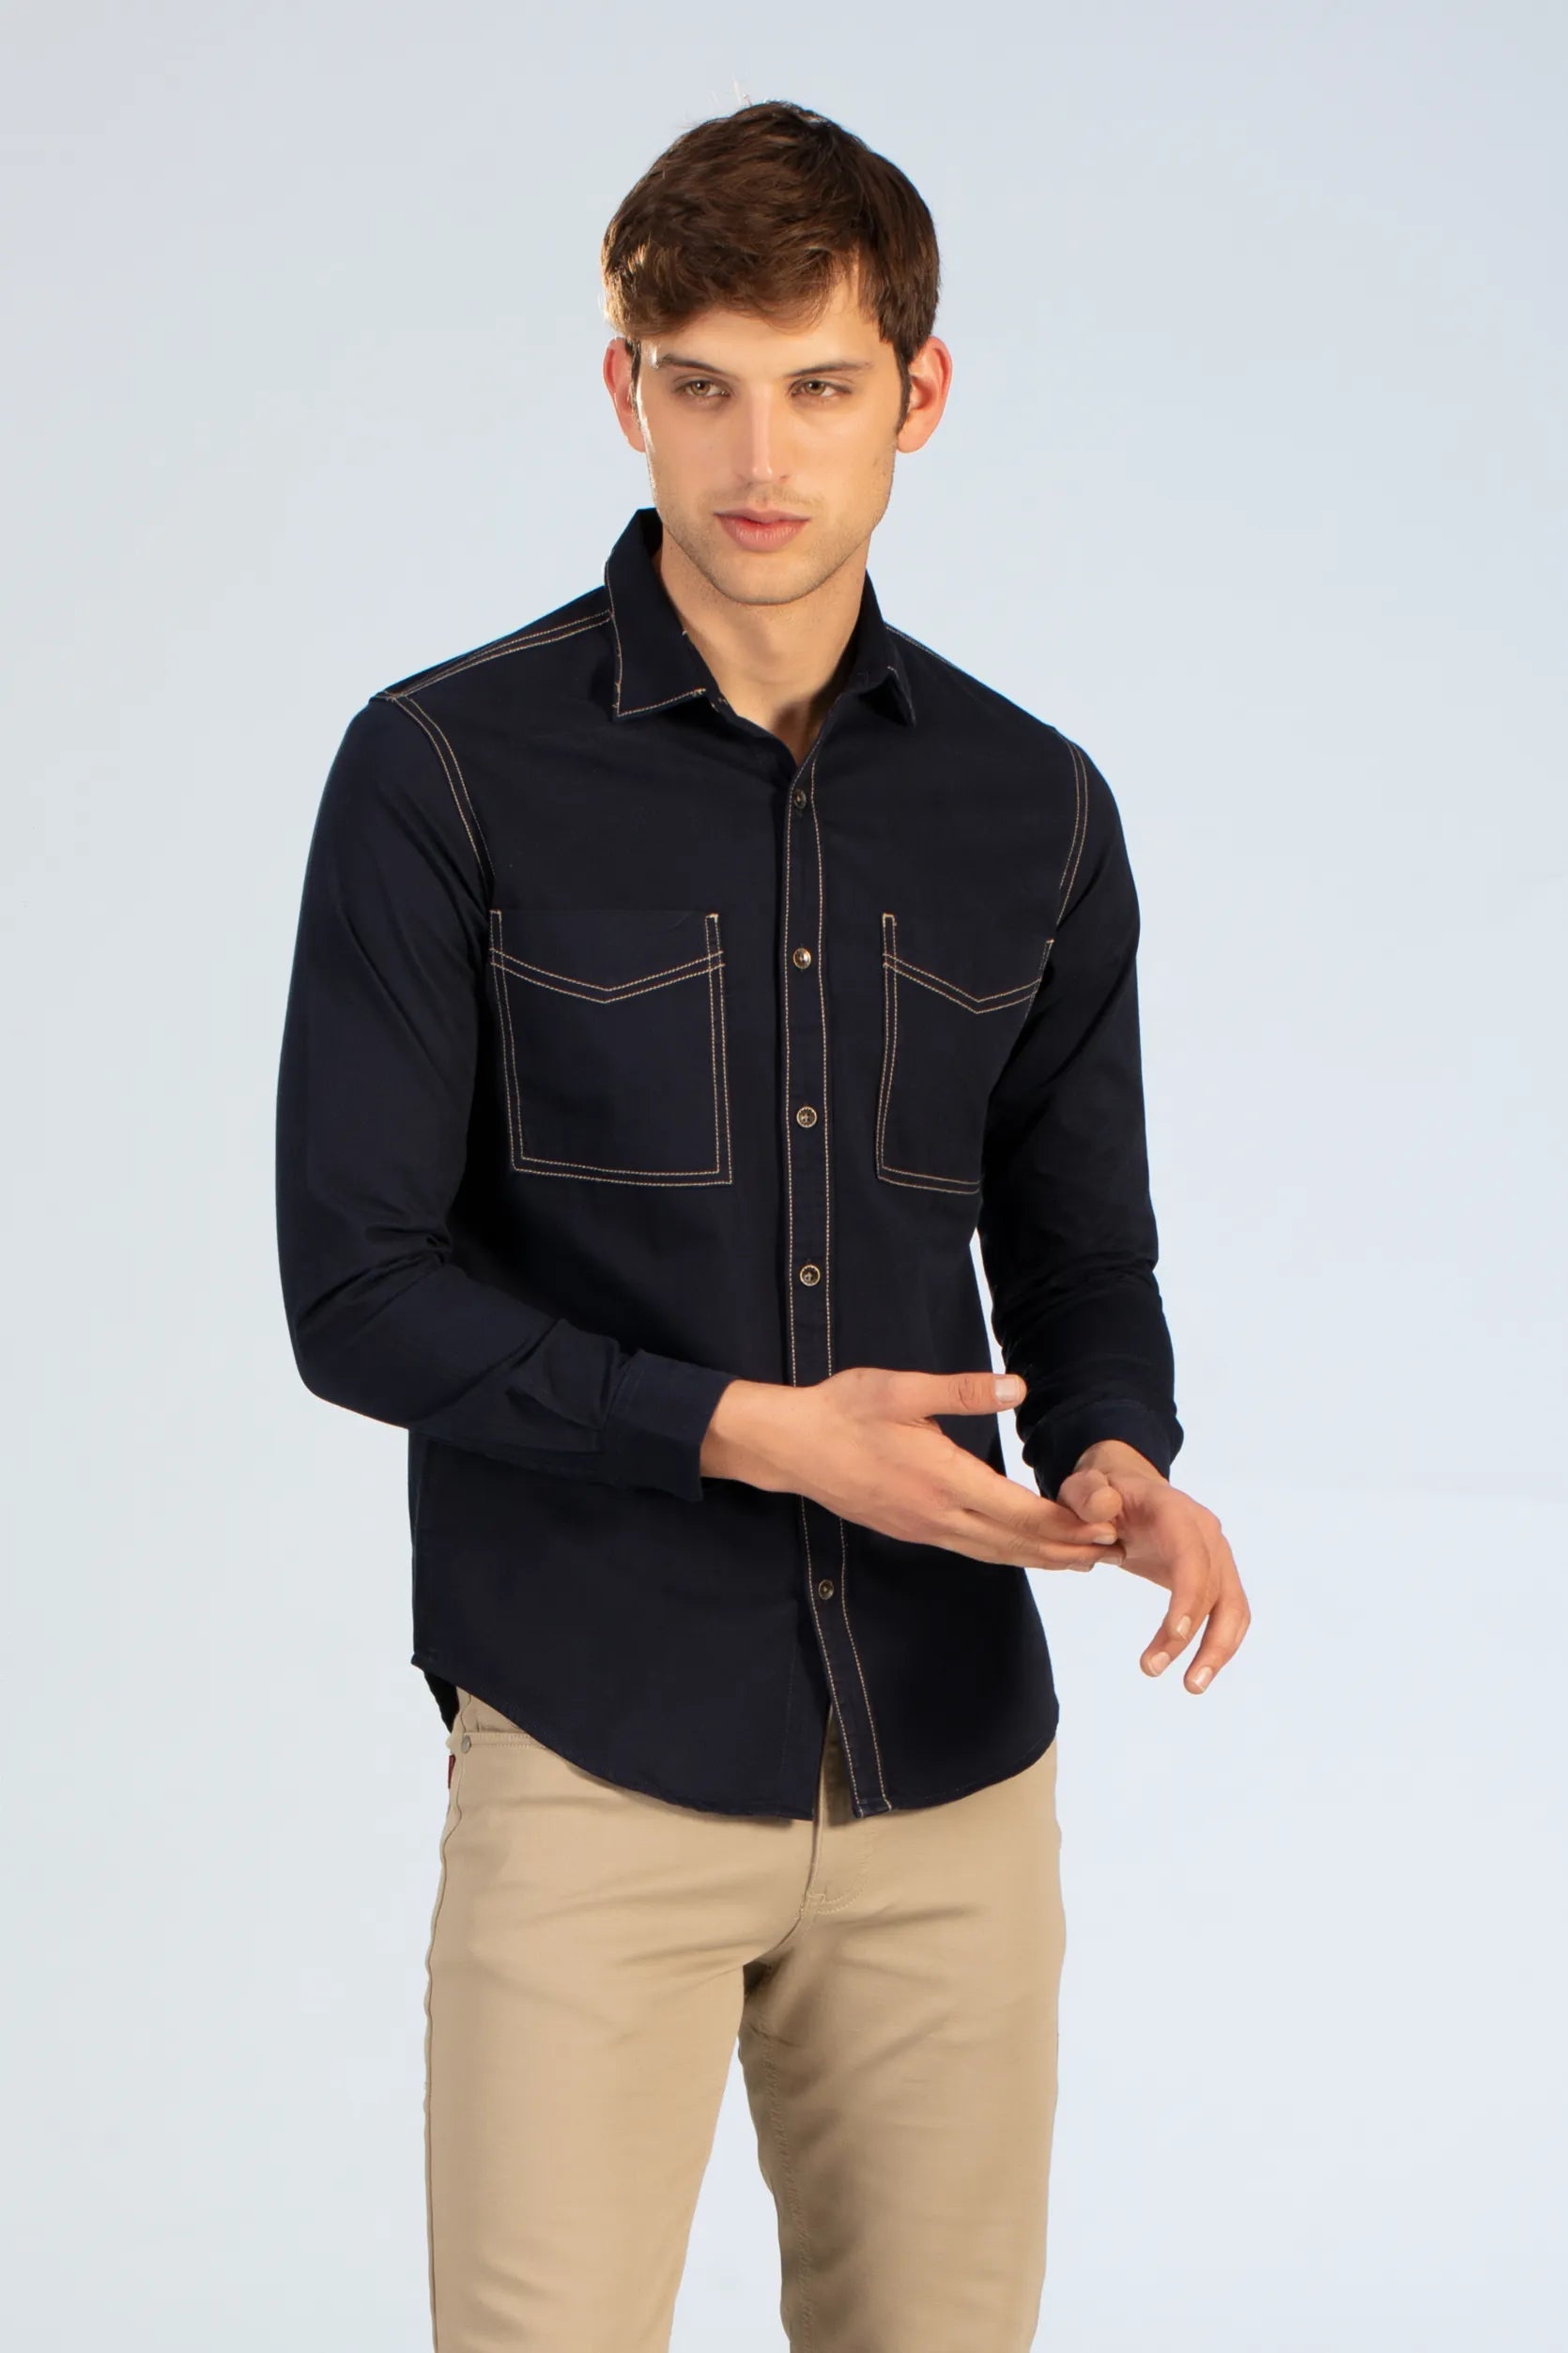 Buy Casual Double Pocket Twill Shirt Online.